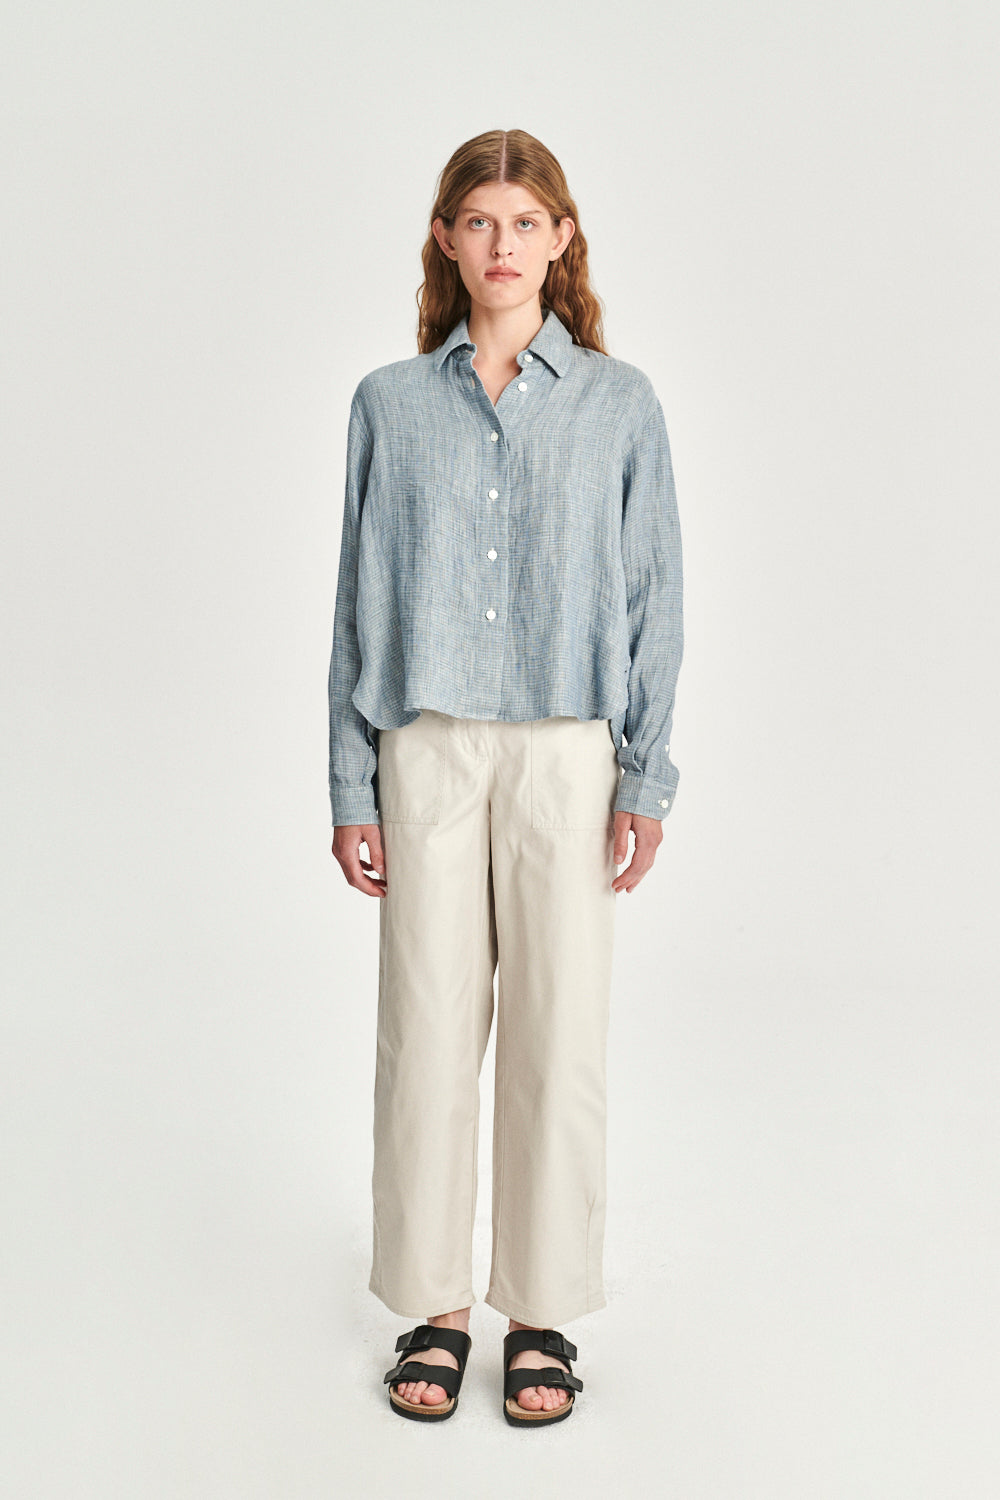 Relaxed Shirt in a Double Sided Blue and Green Italian Fatigue Linen and Cotton